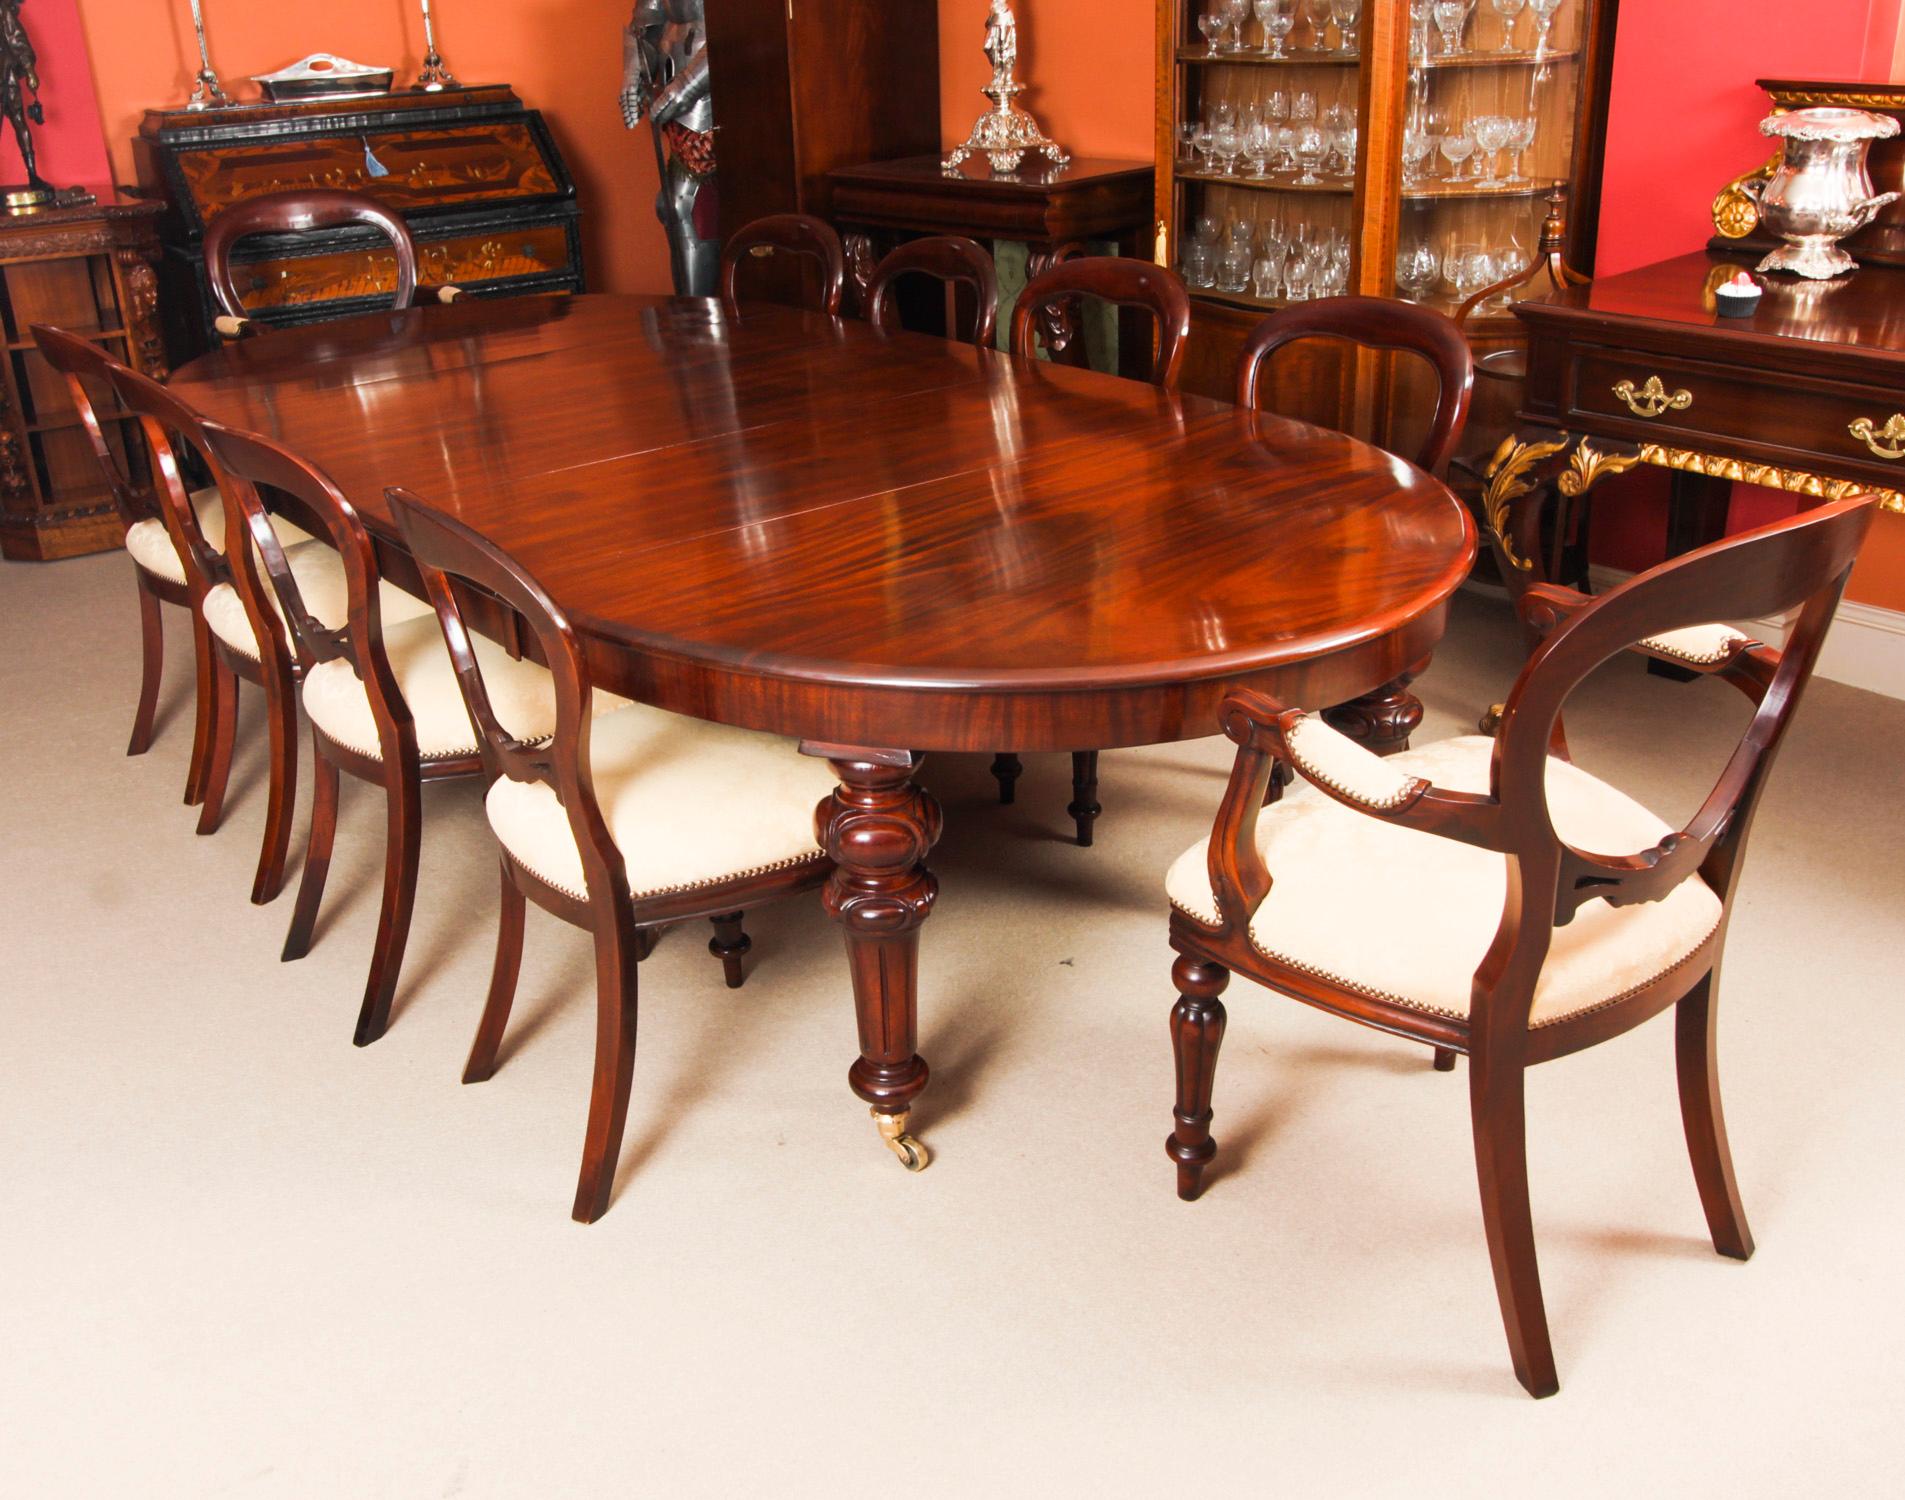 This is a fabulous antique Victorian oval flame mahogany extending dining table, circa 1850 in date. 
 
The table has two original leaves and can comfortably seat ten. It has been hand-crafted from flame mahogany which has a beautiful grain and